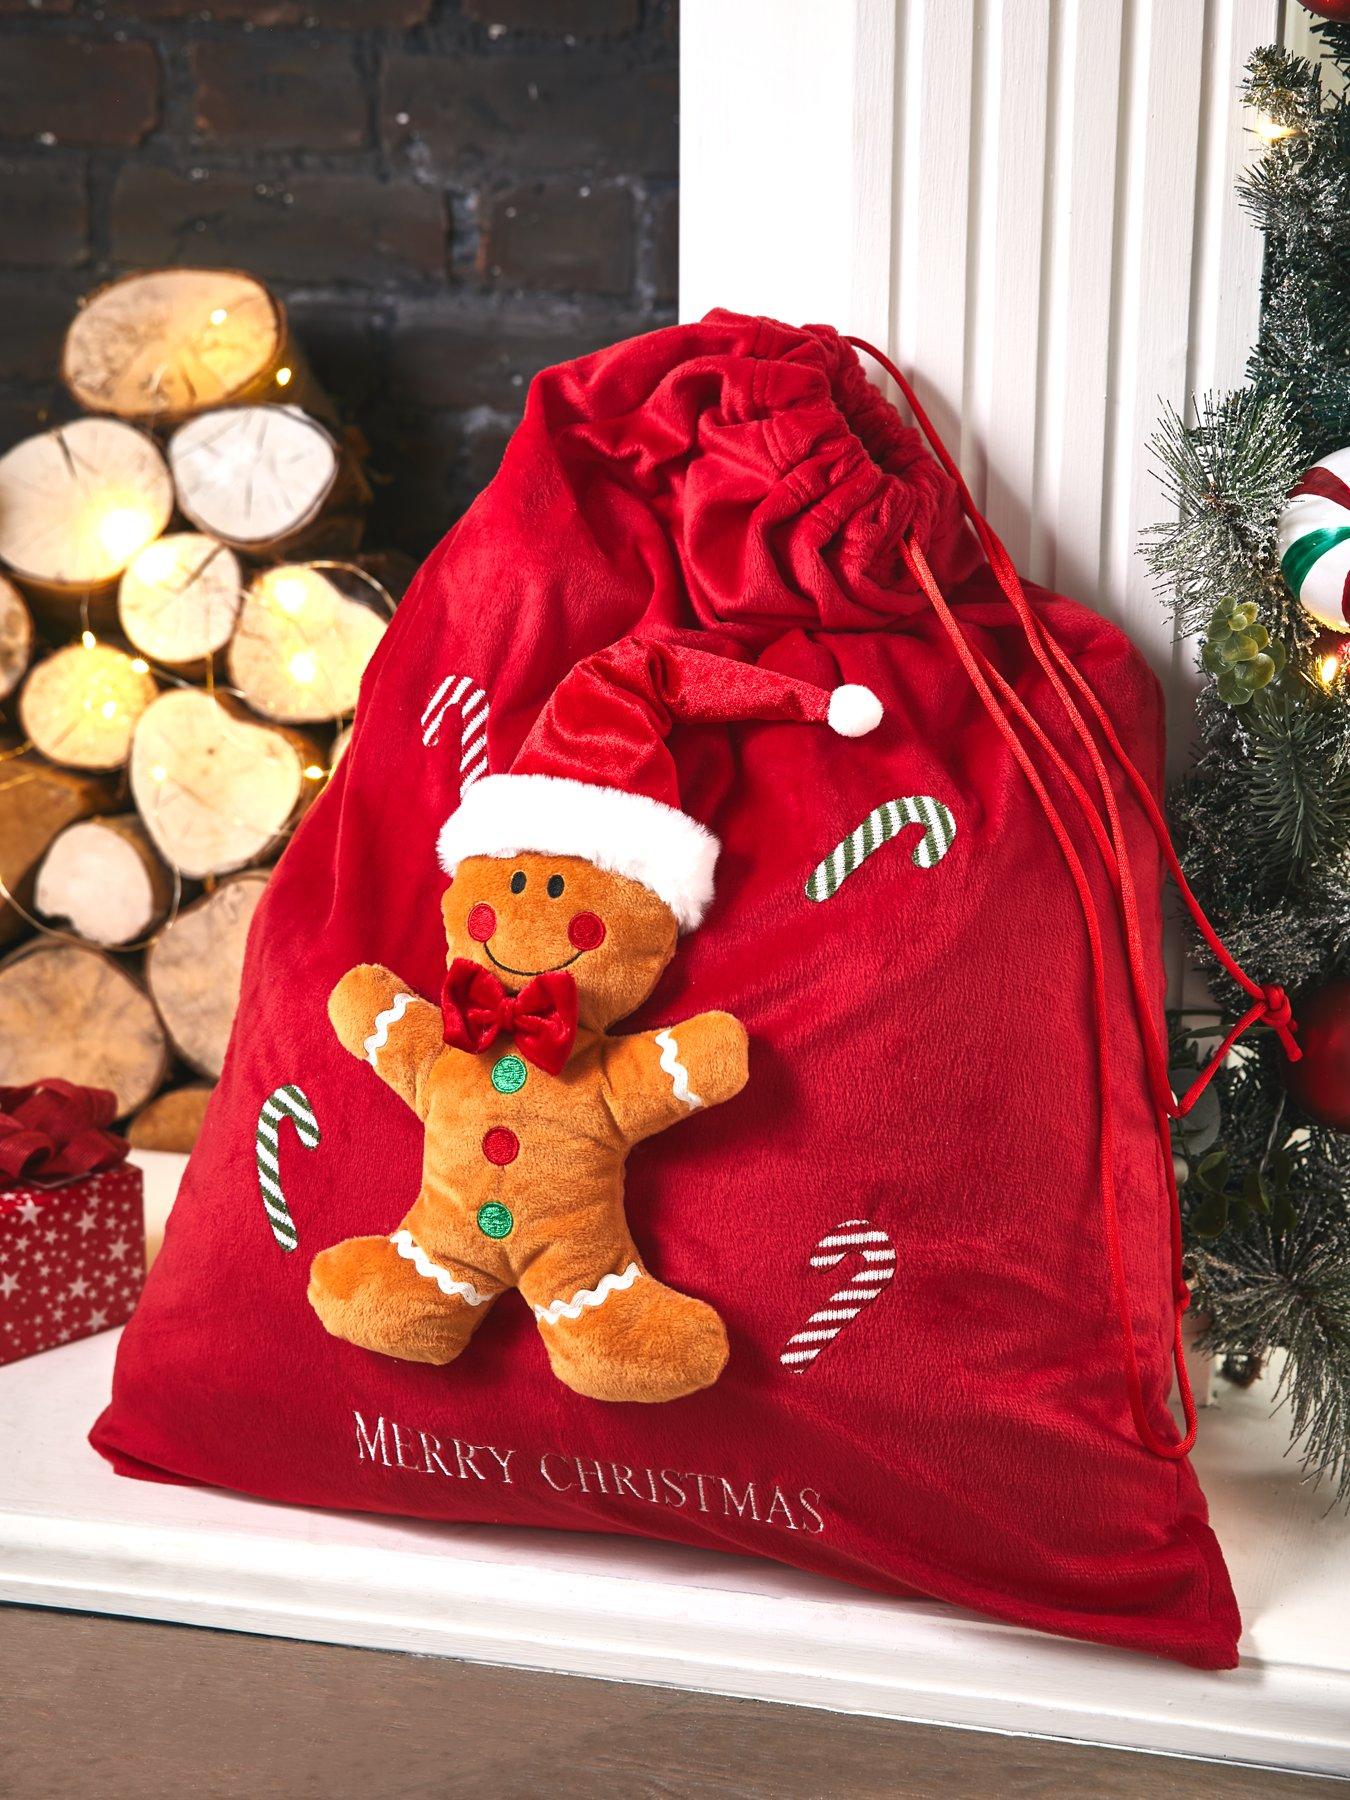 Giant Christmas Teddy Bear 54 Inches White Soft Wears Removable Santa Pants Jacket and Hat